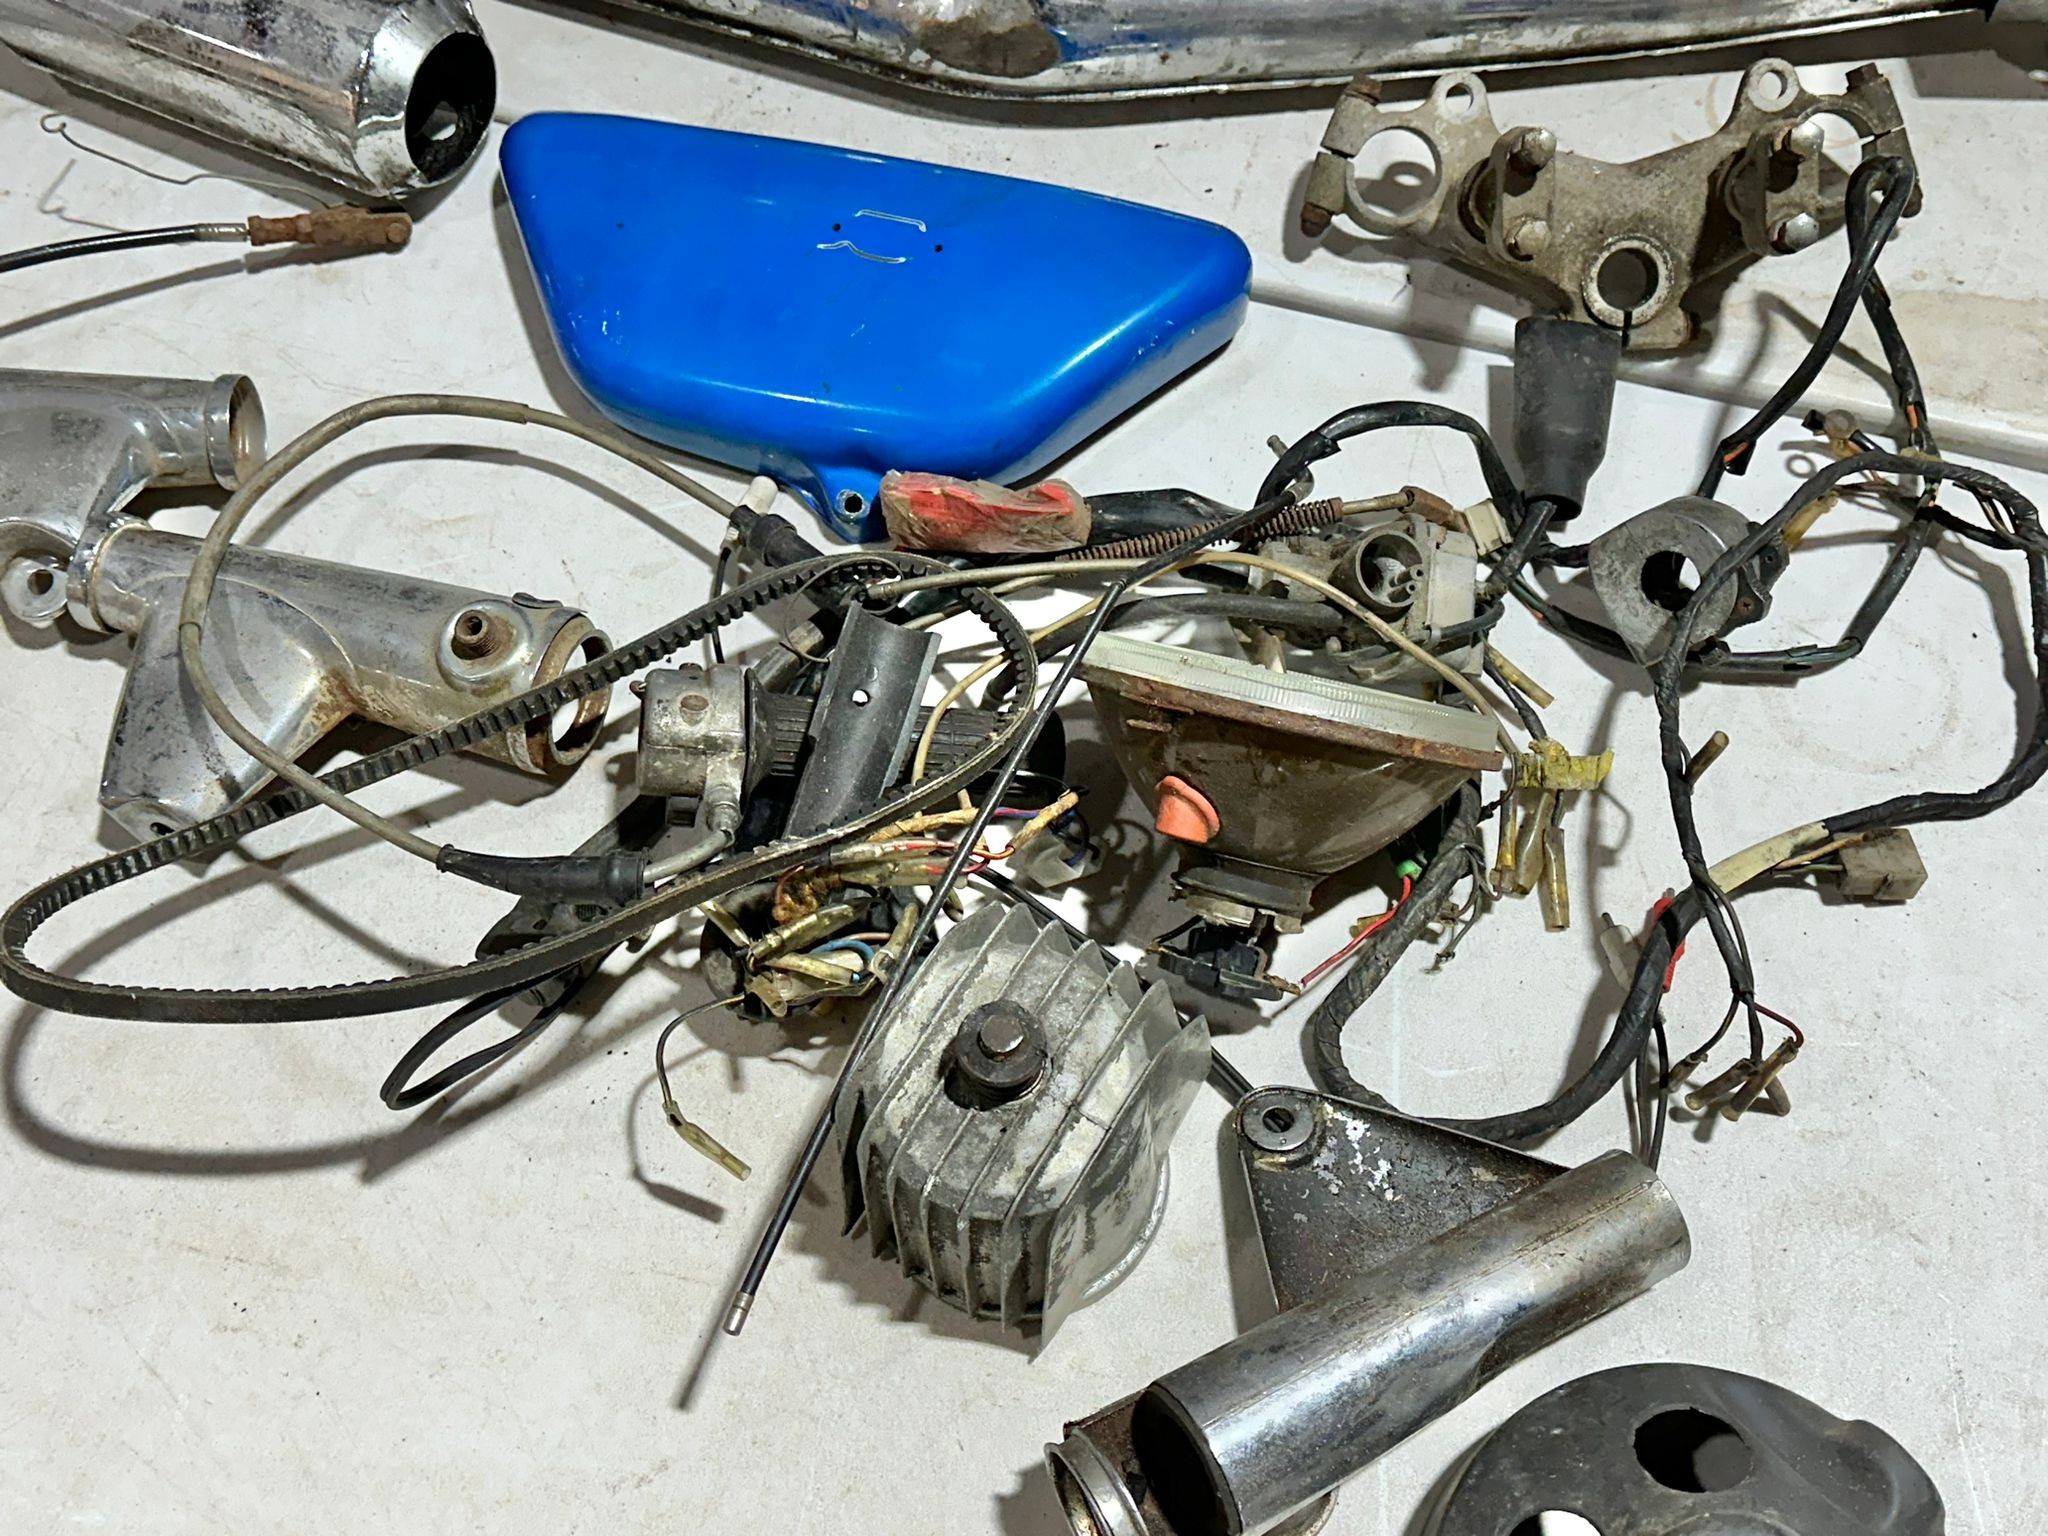 Kawasaki S1 250 White Ghost 2 stroke Frame 1972, with parts, engine and documents - Image 5 of 28